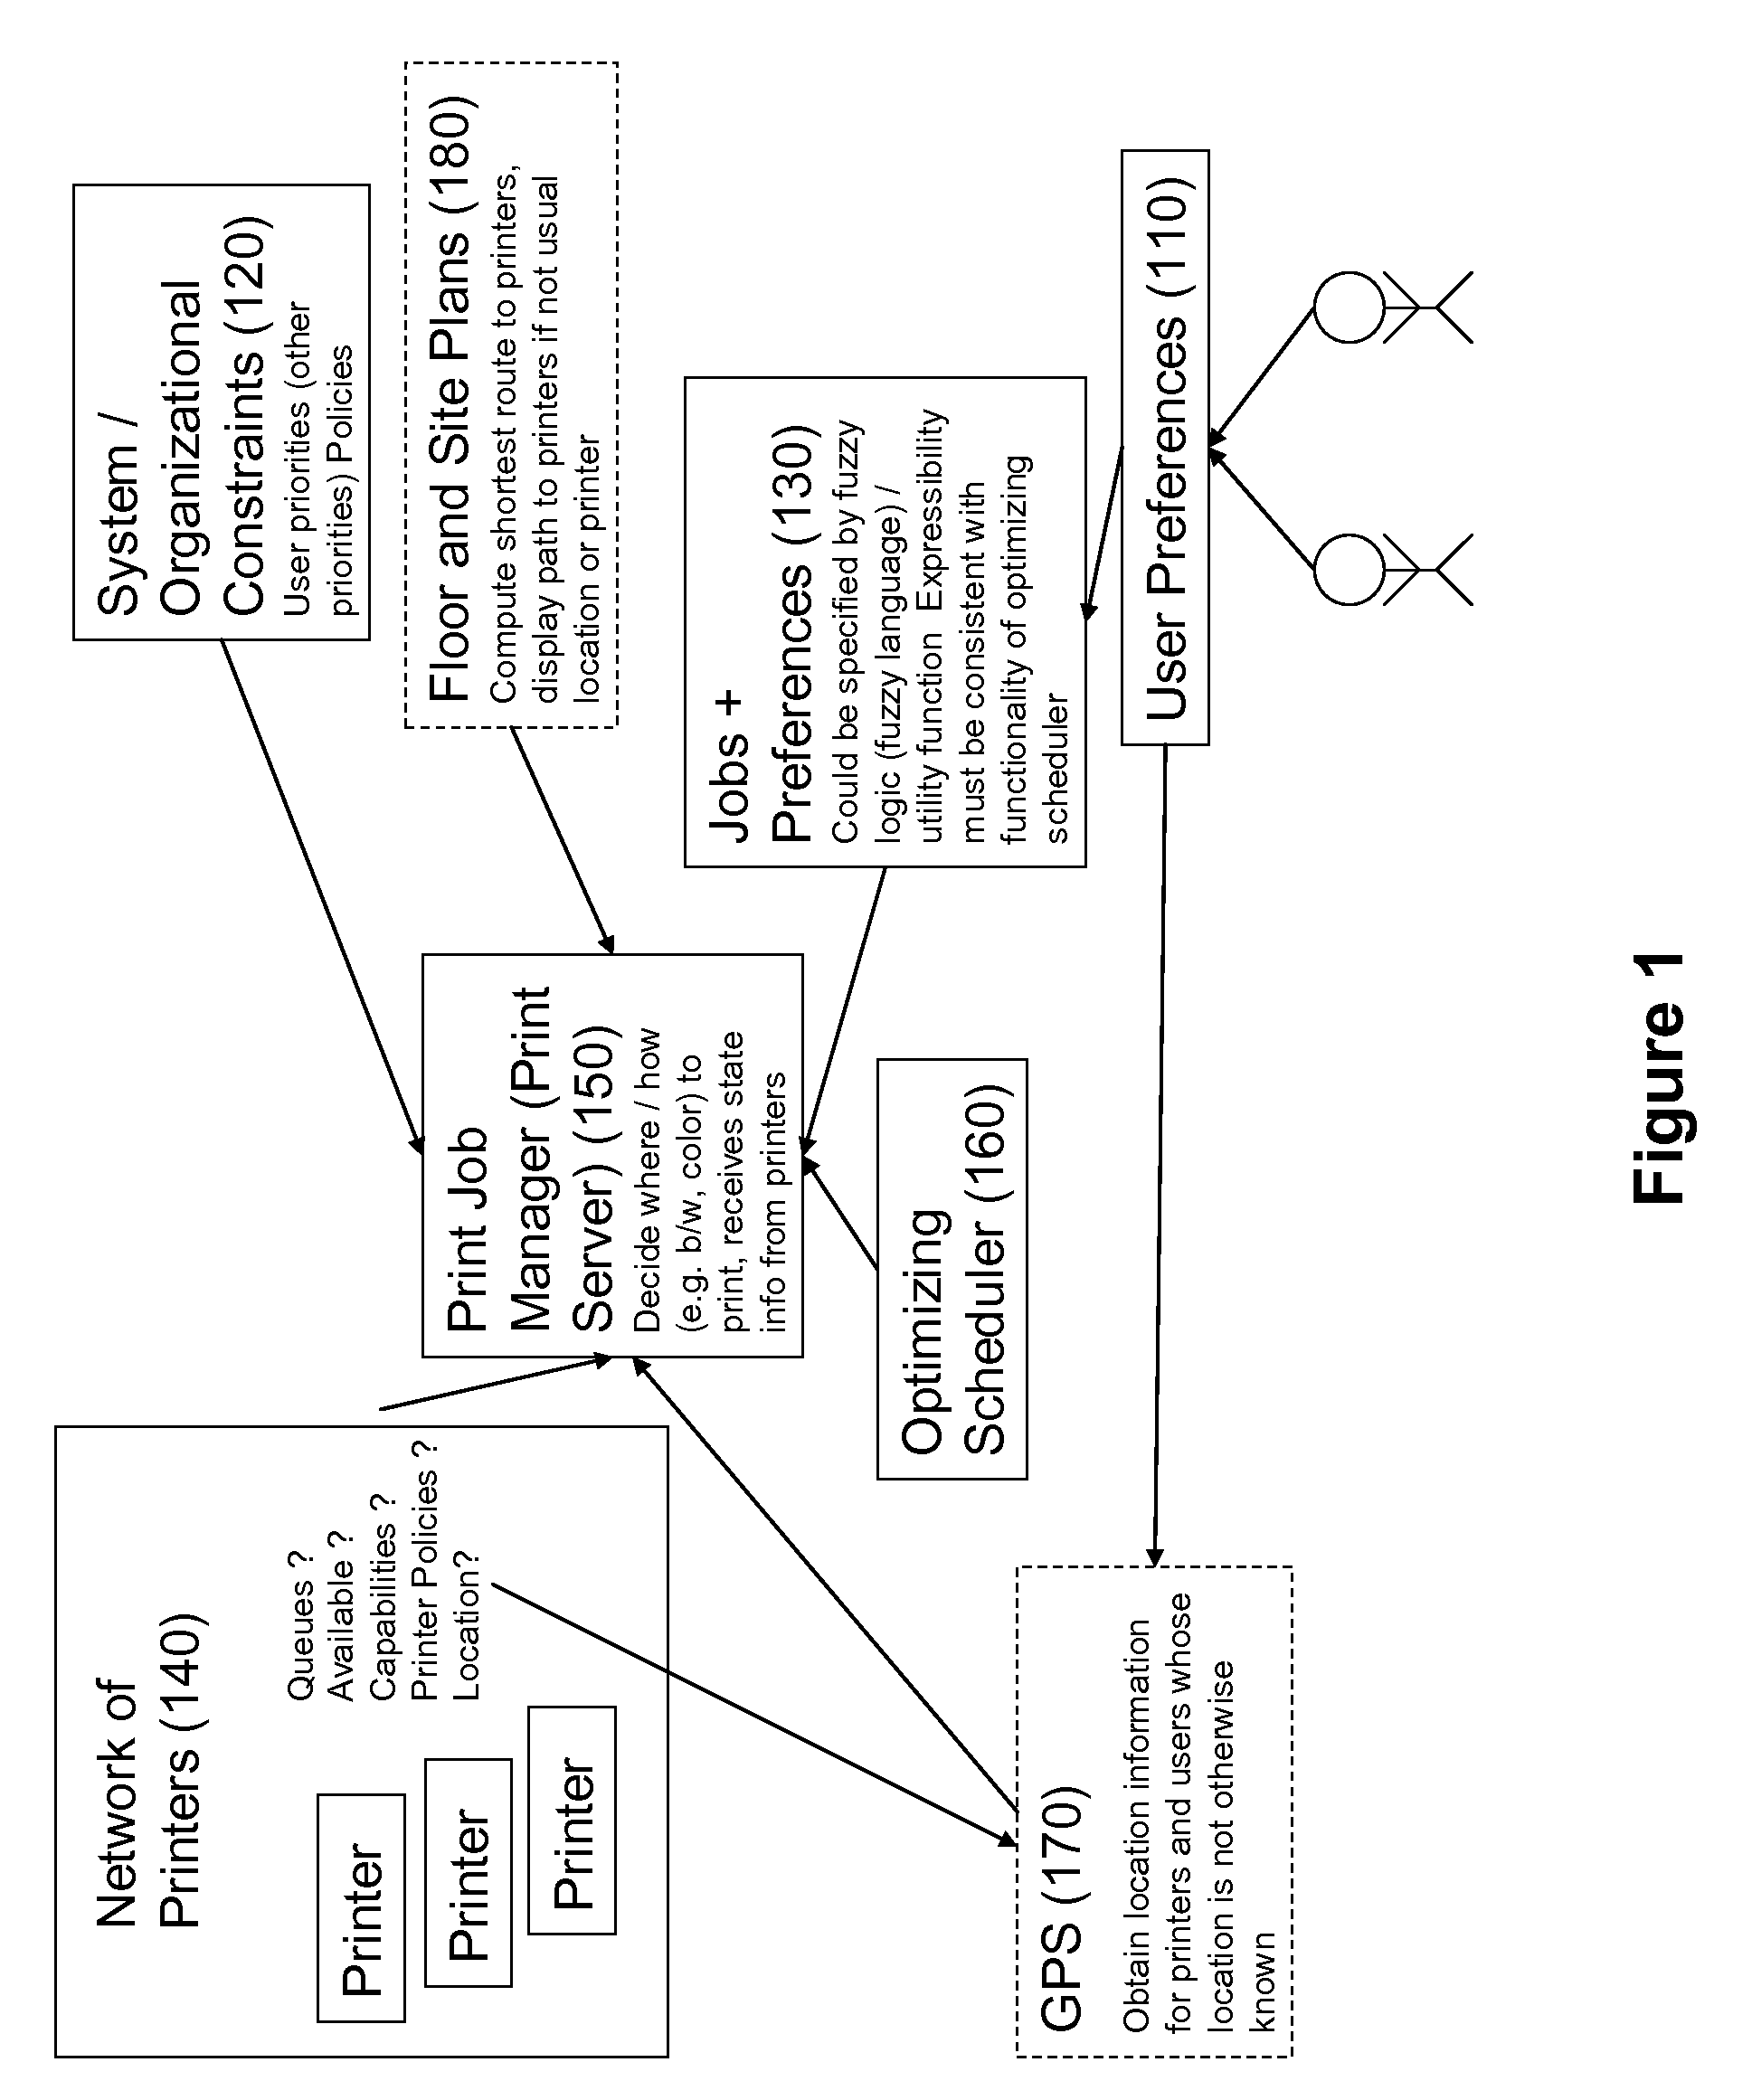 Policy based system and method for optimizing output device submission, use and wait times